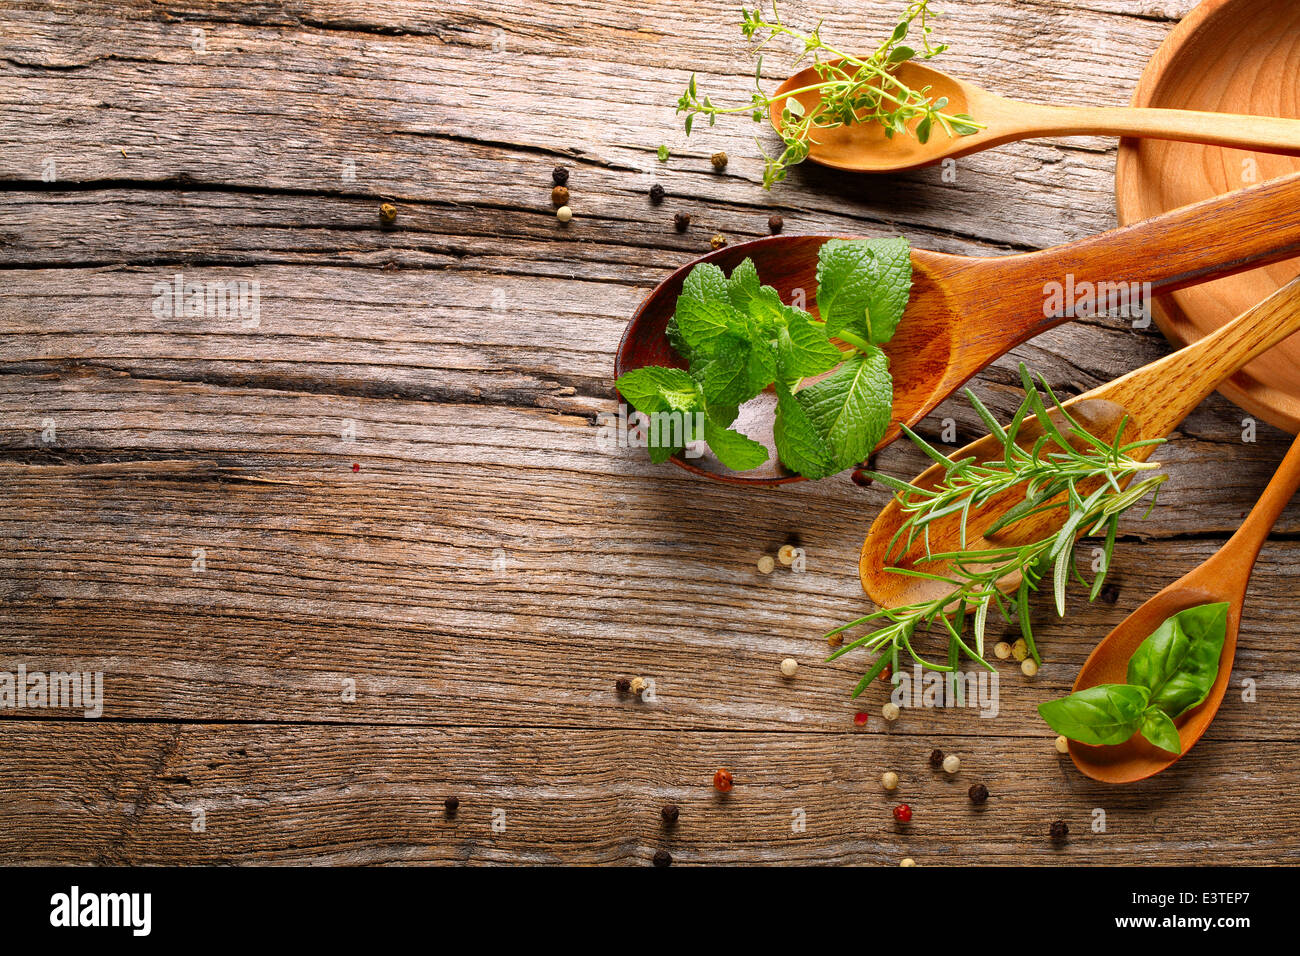 herbs and spice on wooden table Stock Photo